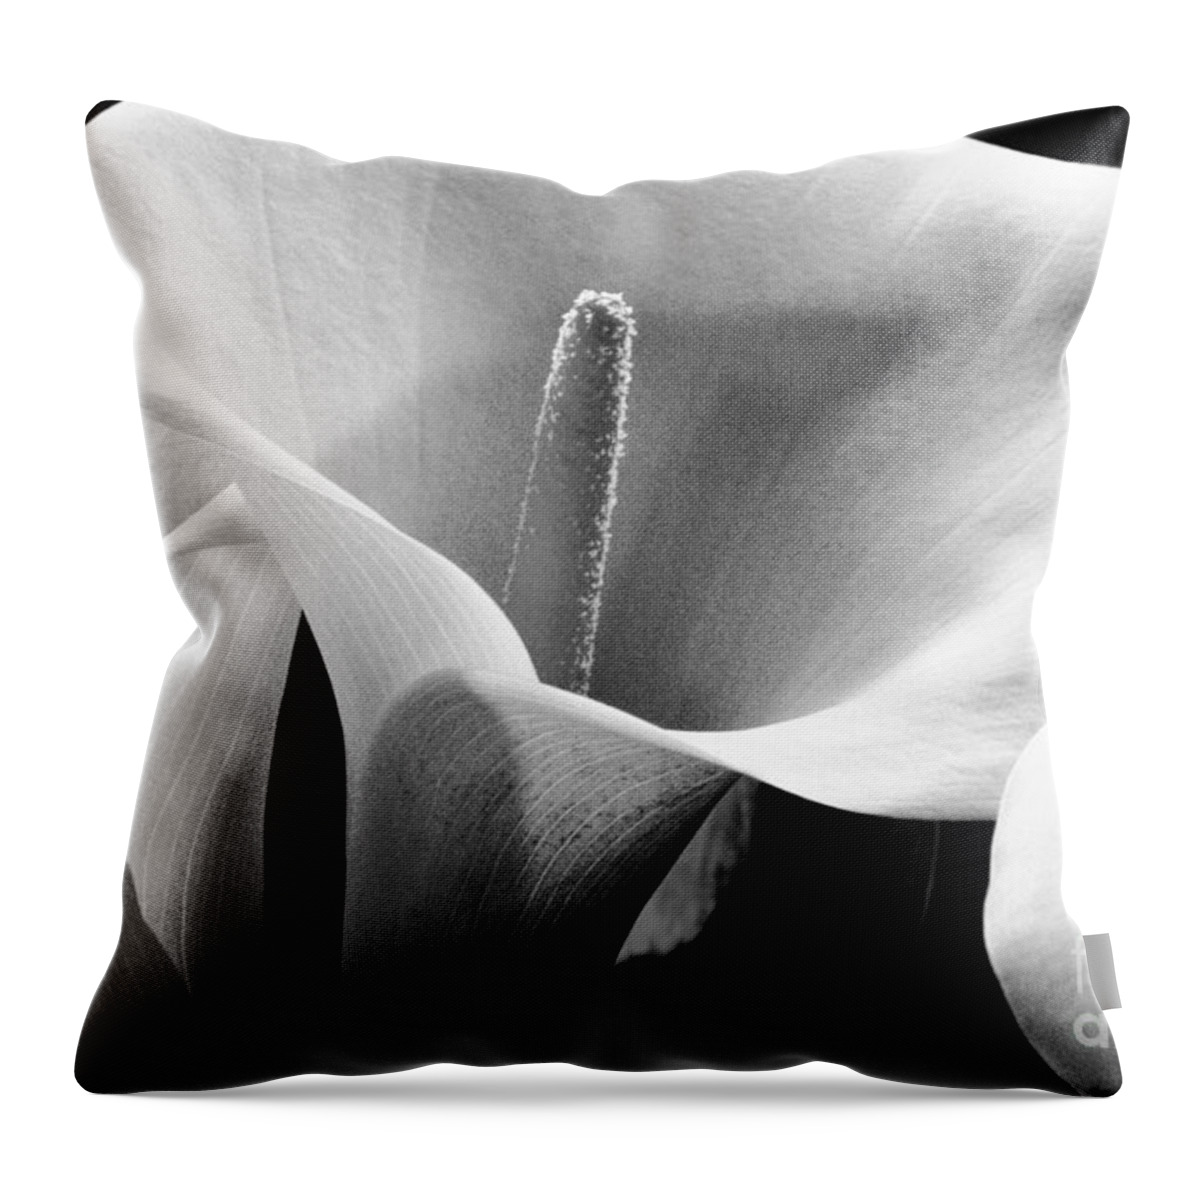 43-csb0023 Throw Pillow featuring the photograph Calla Lilies by William Waterfall - Printscapes